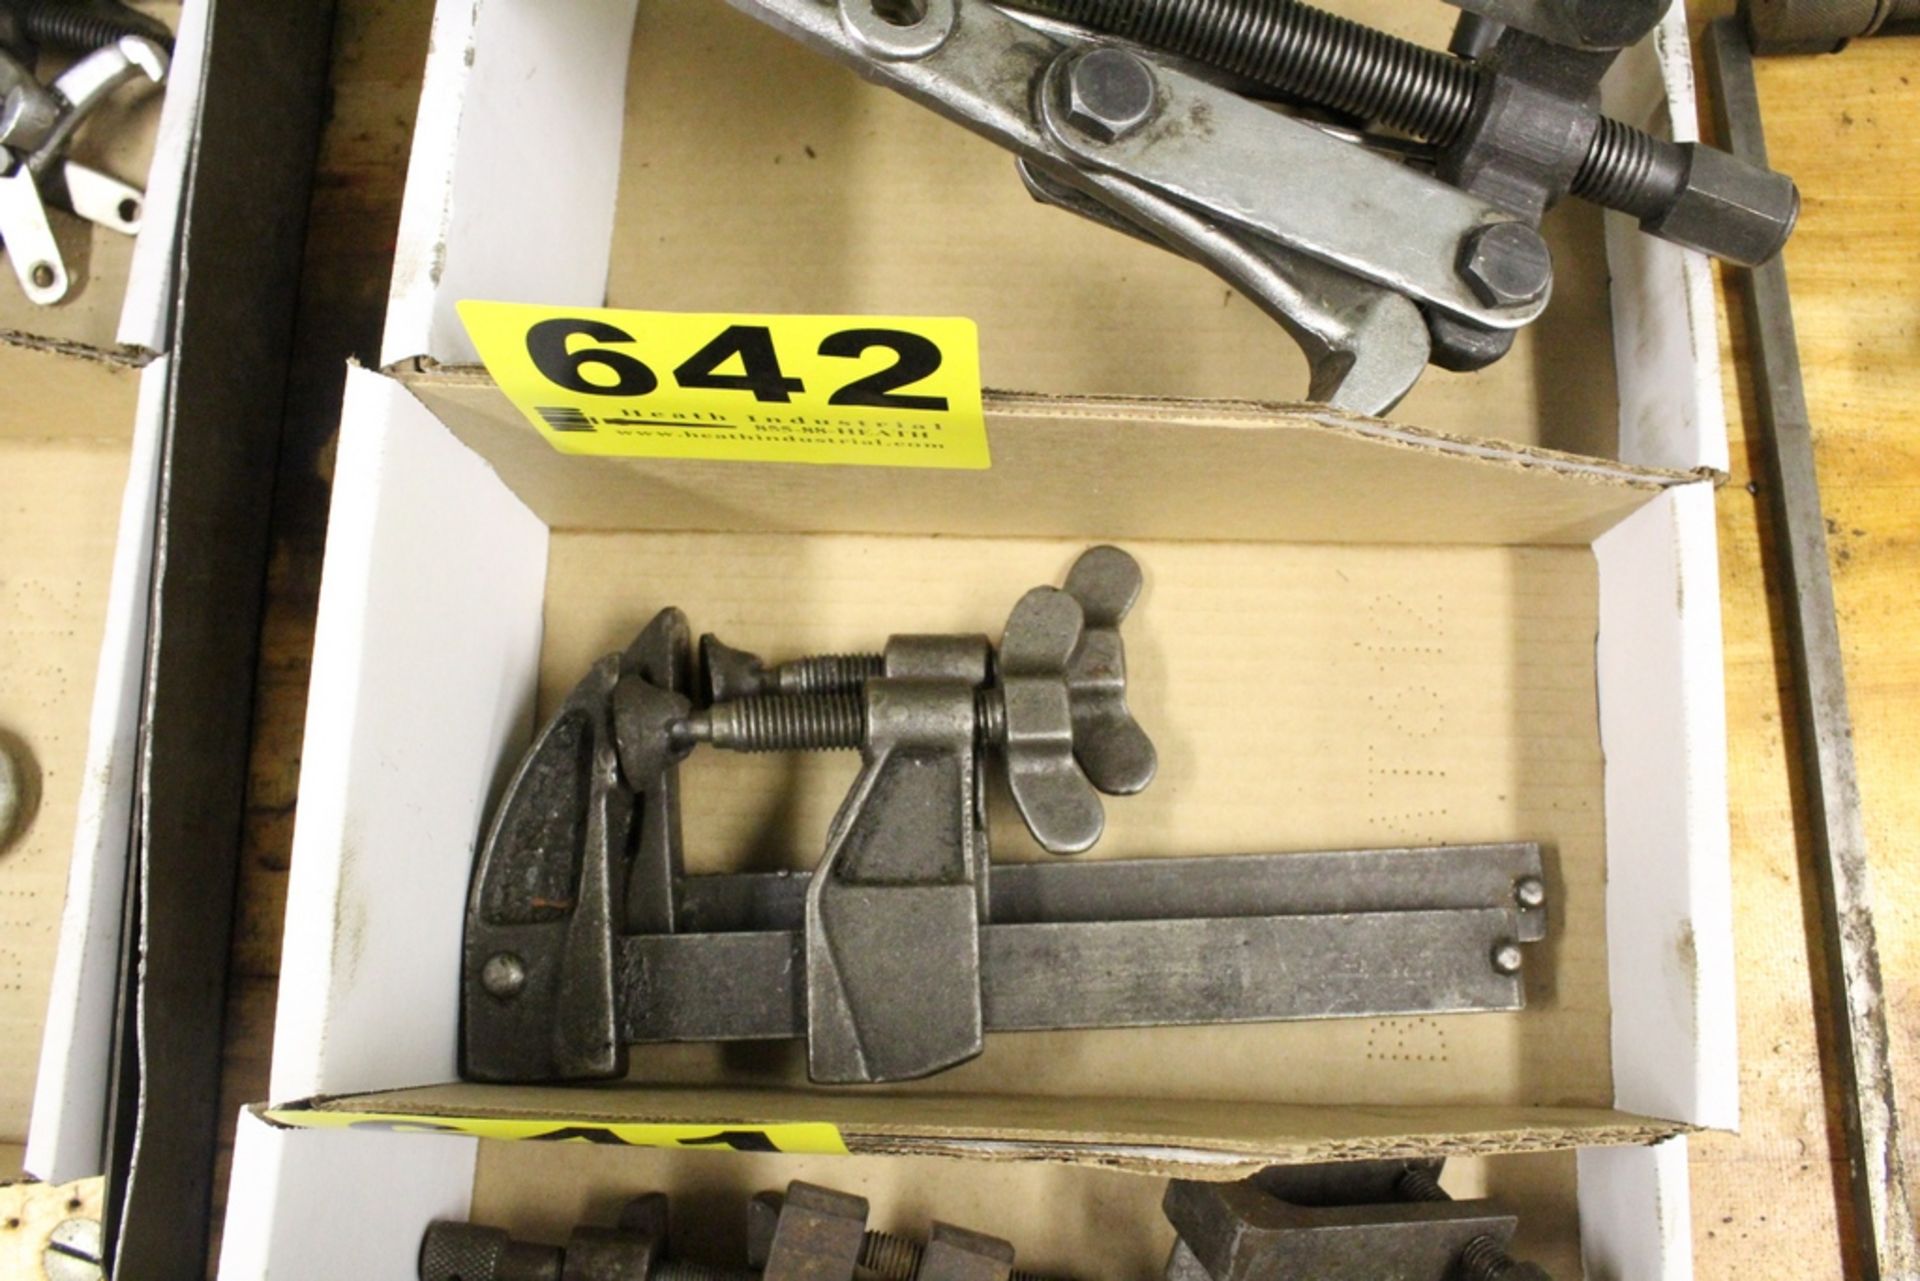 (2) 6" BAR CLAMPS IN BOX